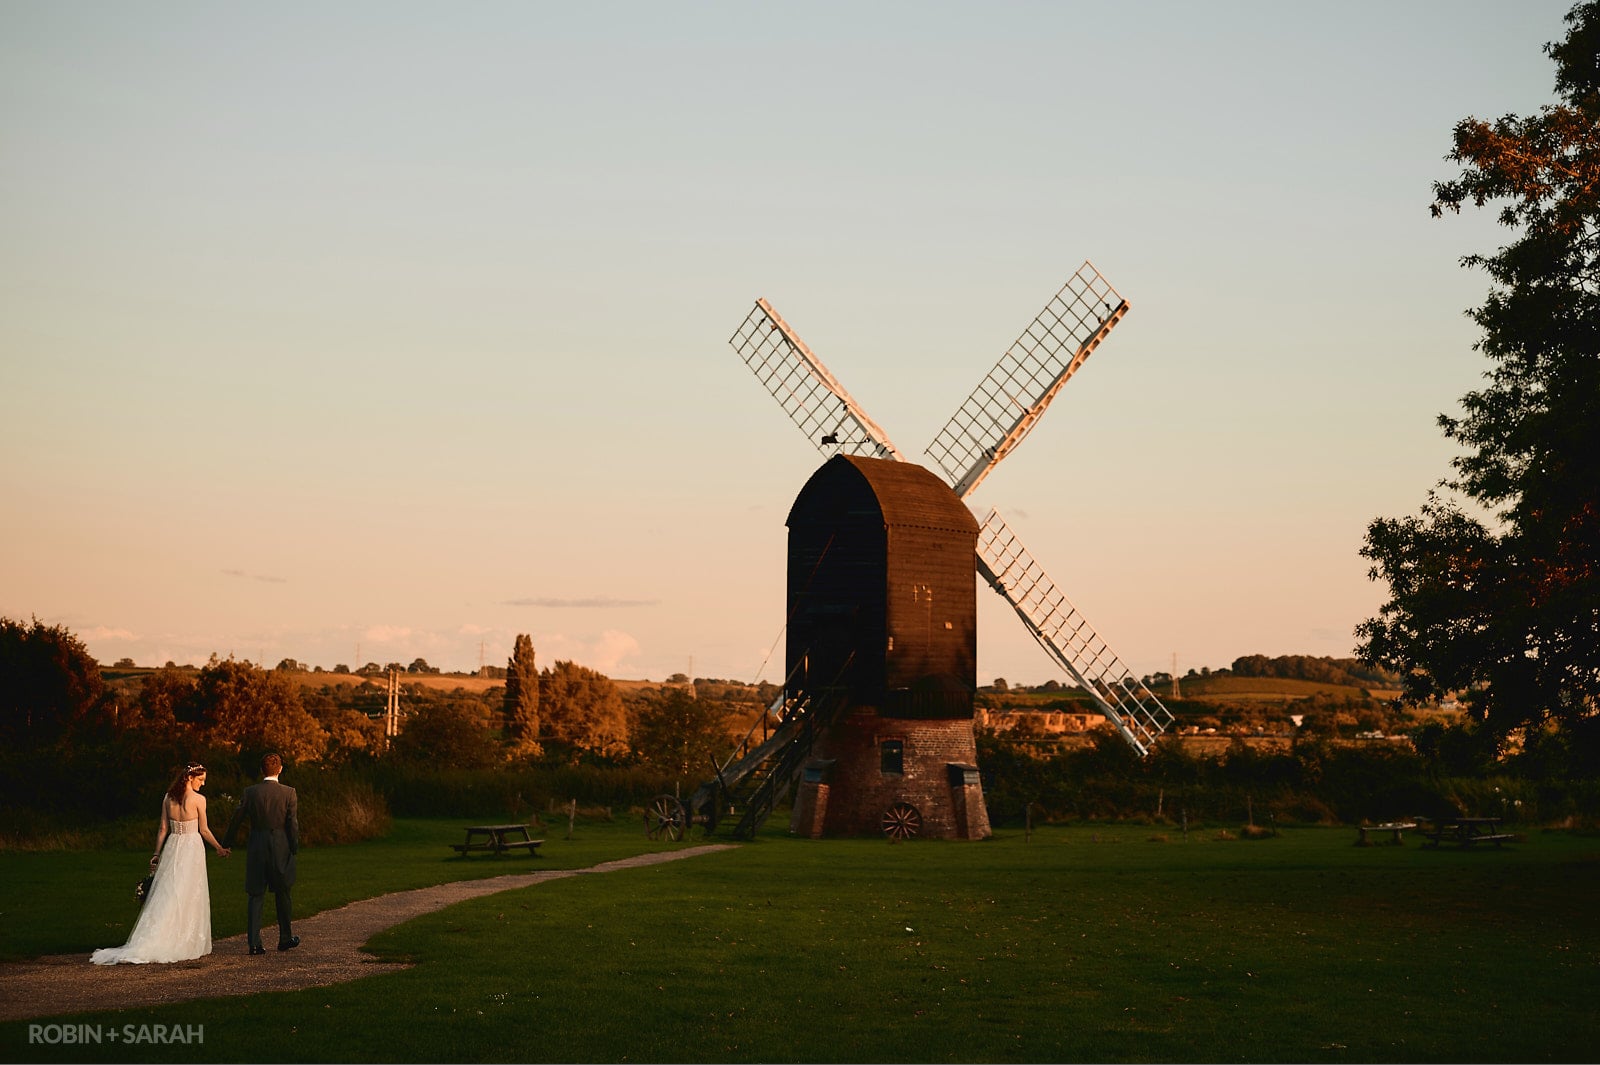 Bride and groom with old windmill